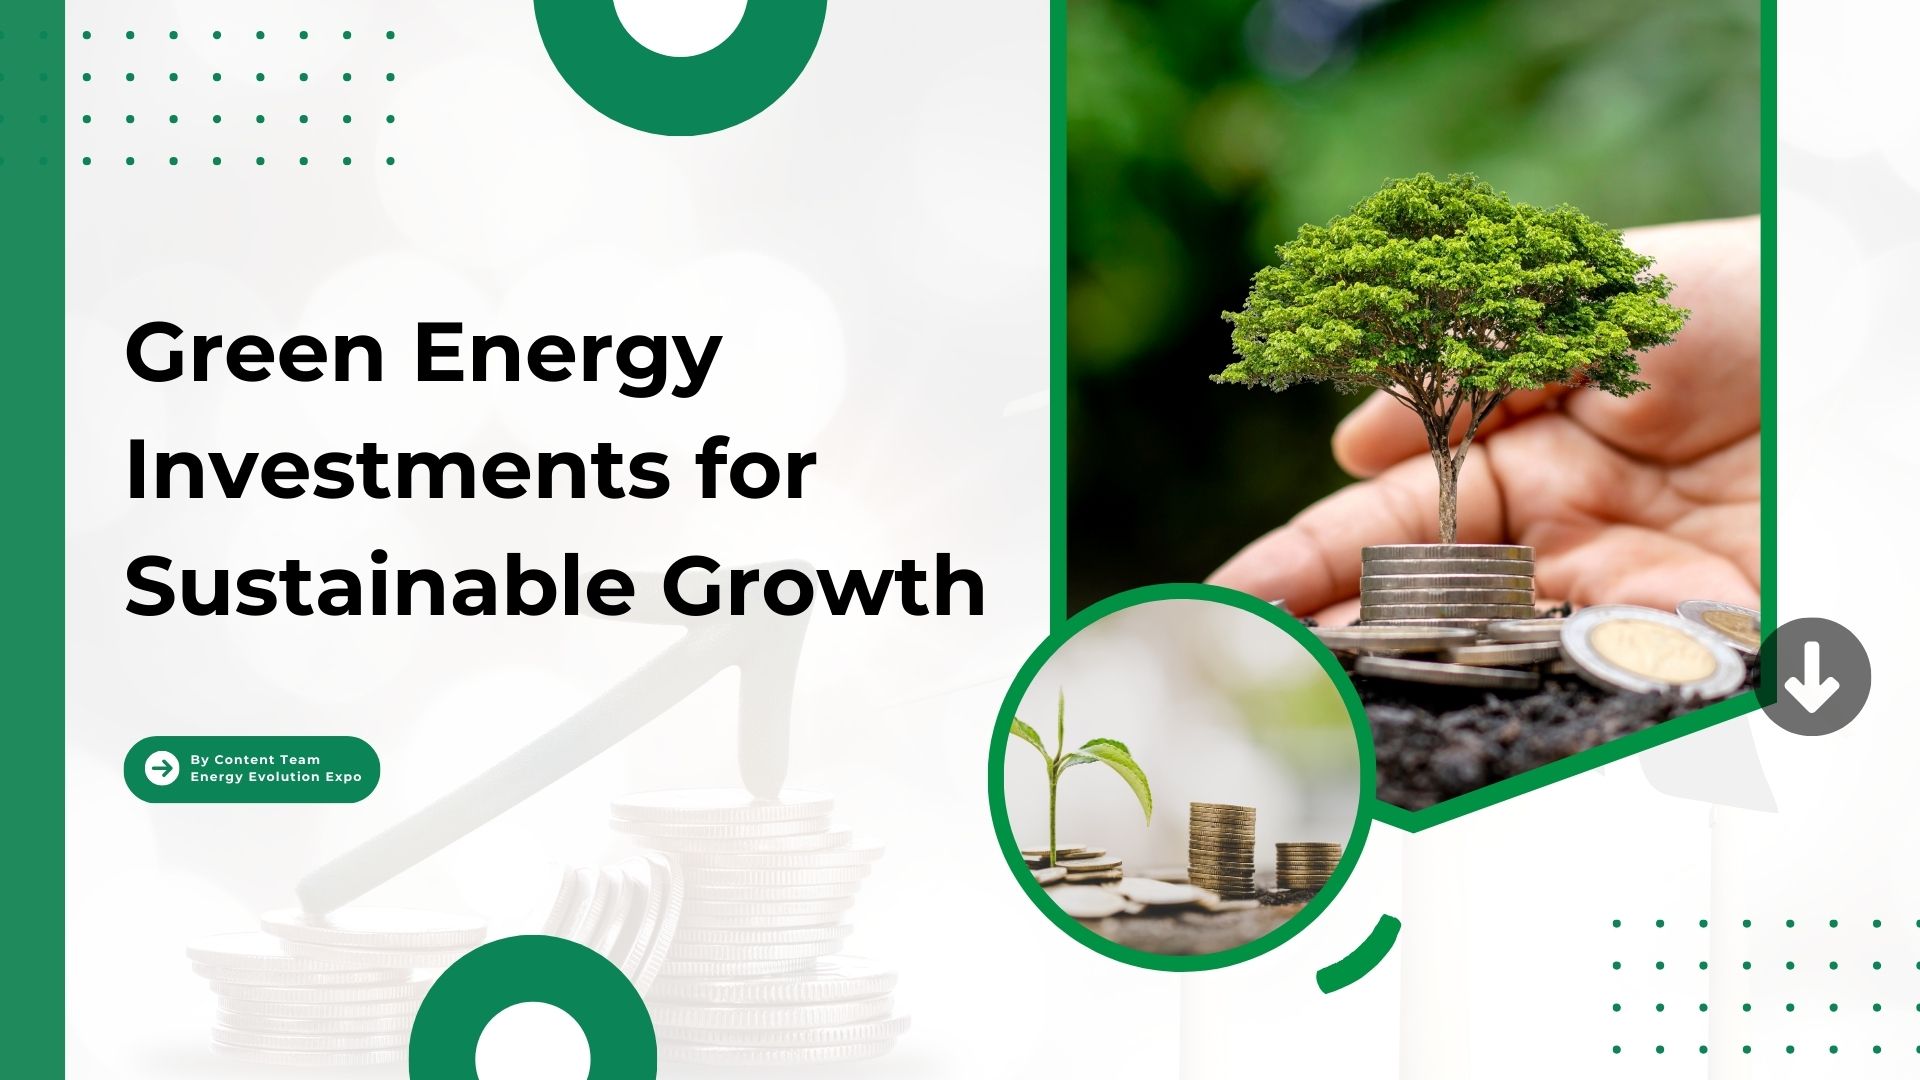 Green Energy Investments for Sustainable Growth (2)